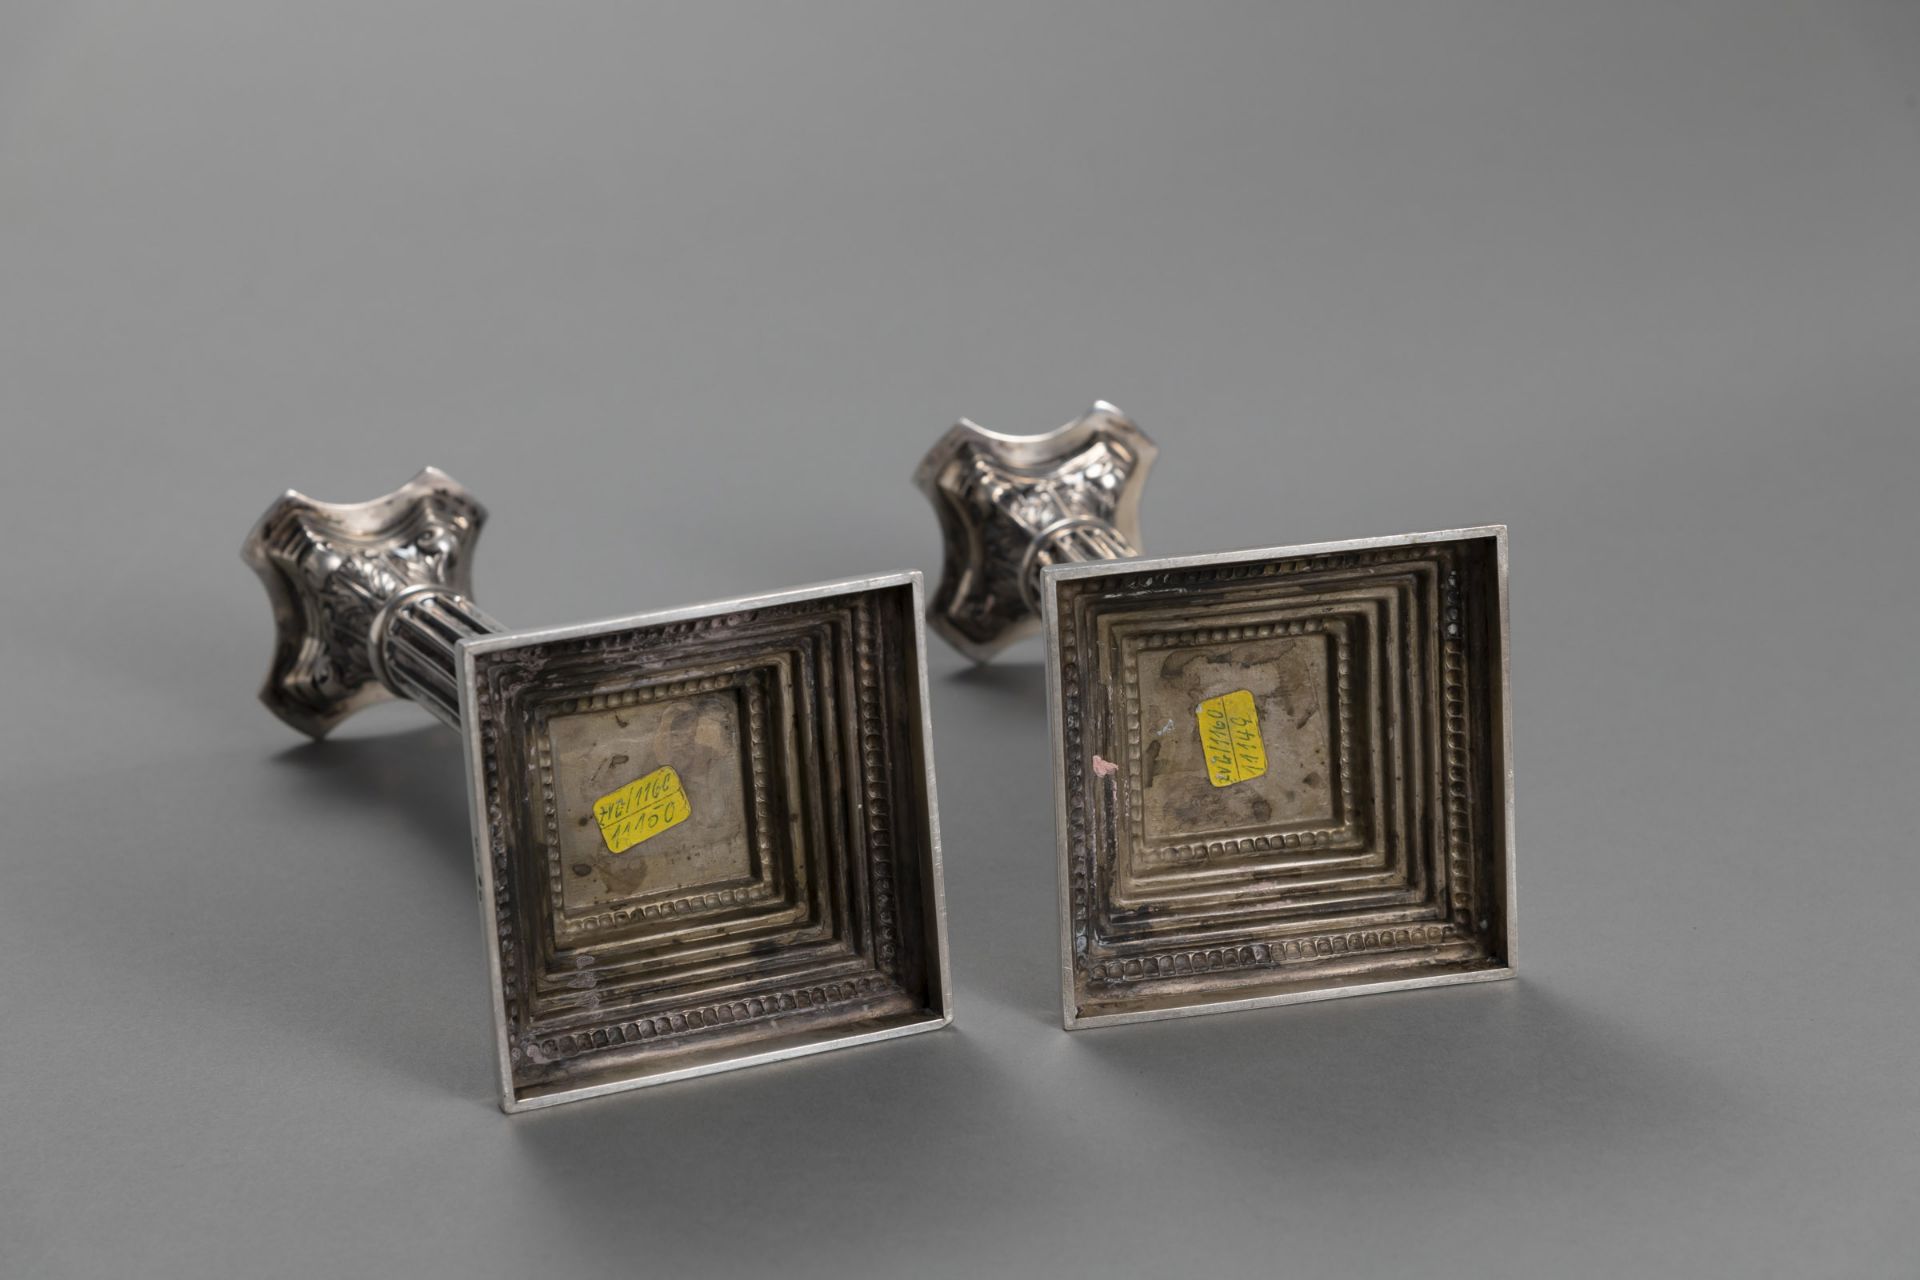 A PAIR OF PORTOGUESE SILVER CANDLESTICKS - Image 4 of 4